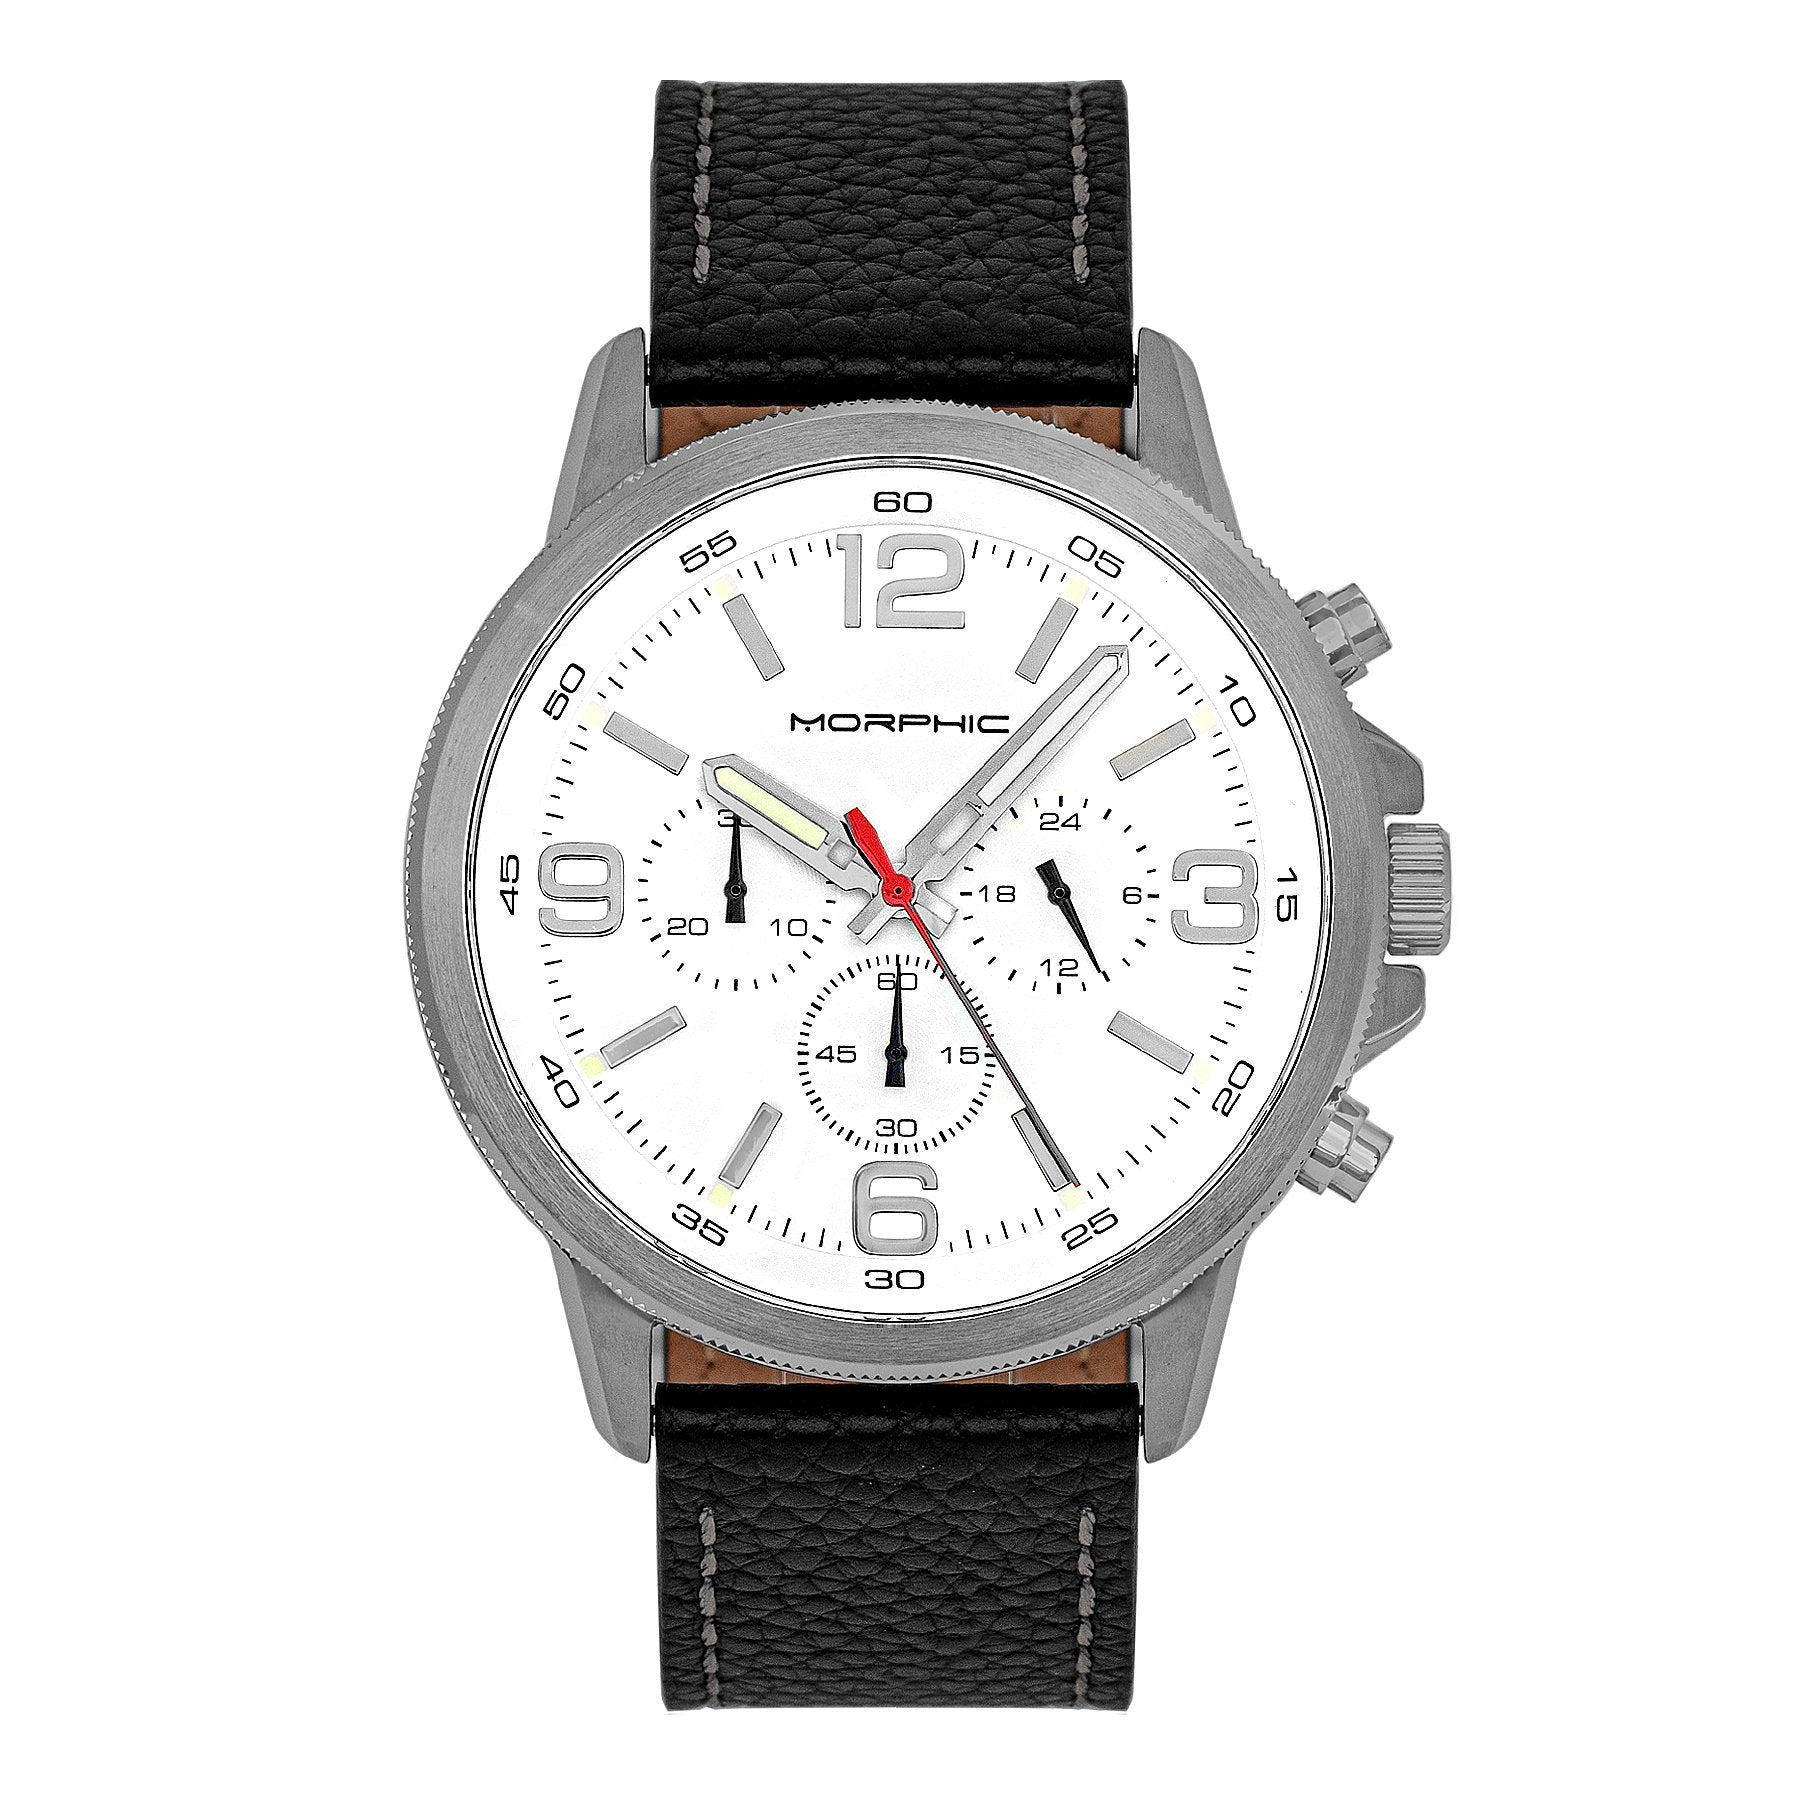 Morphic M86 Series Chronograph Leather-Band Watch - Silver/White - MPH8601